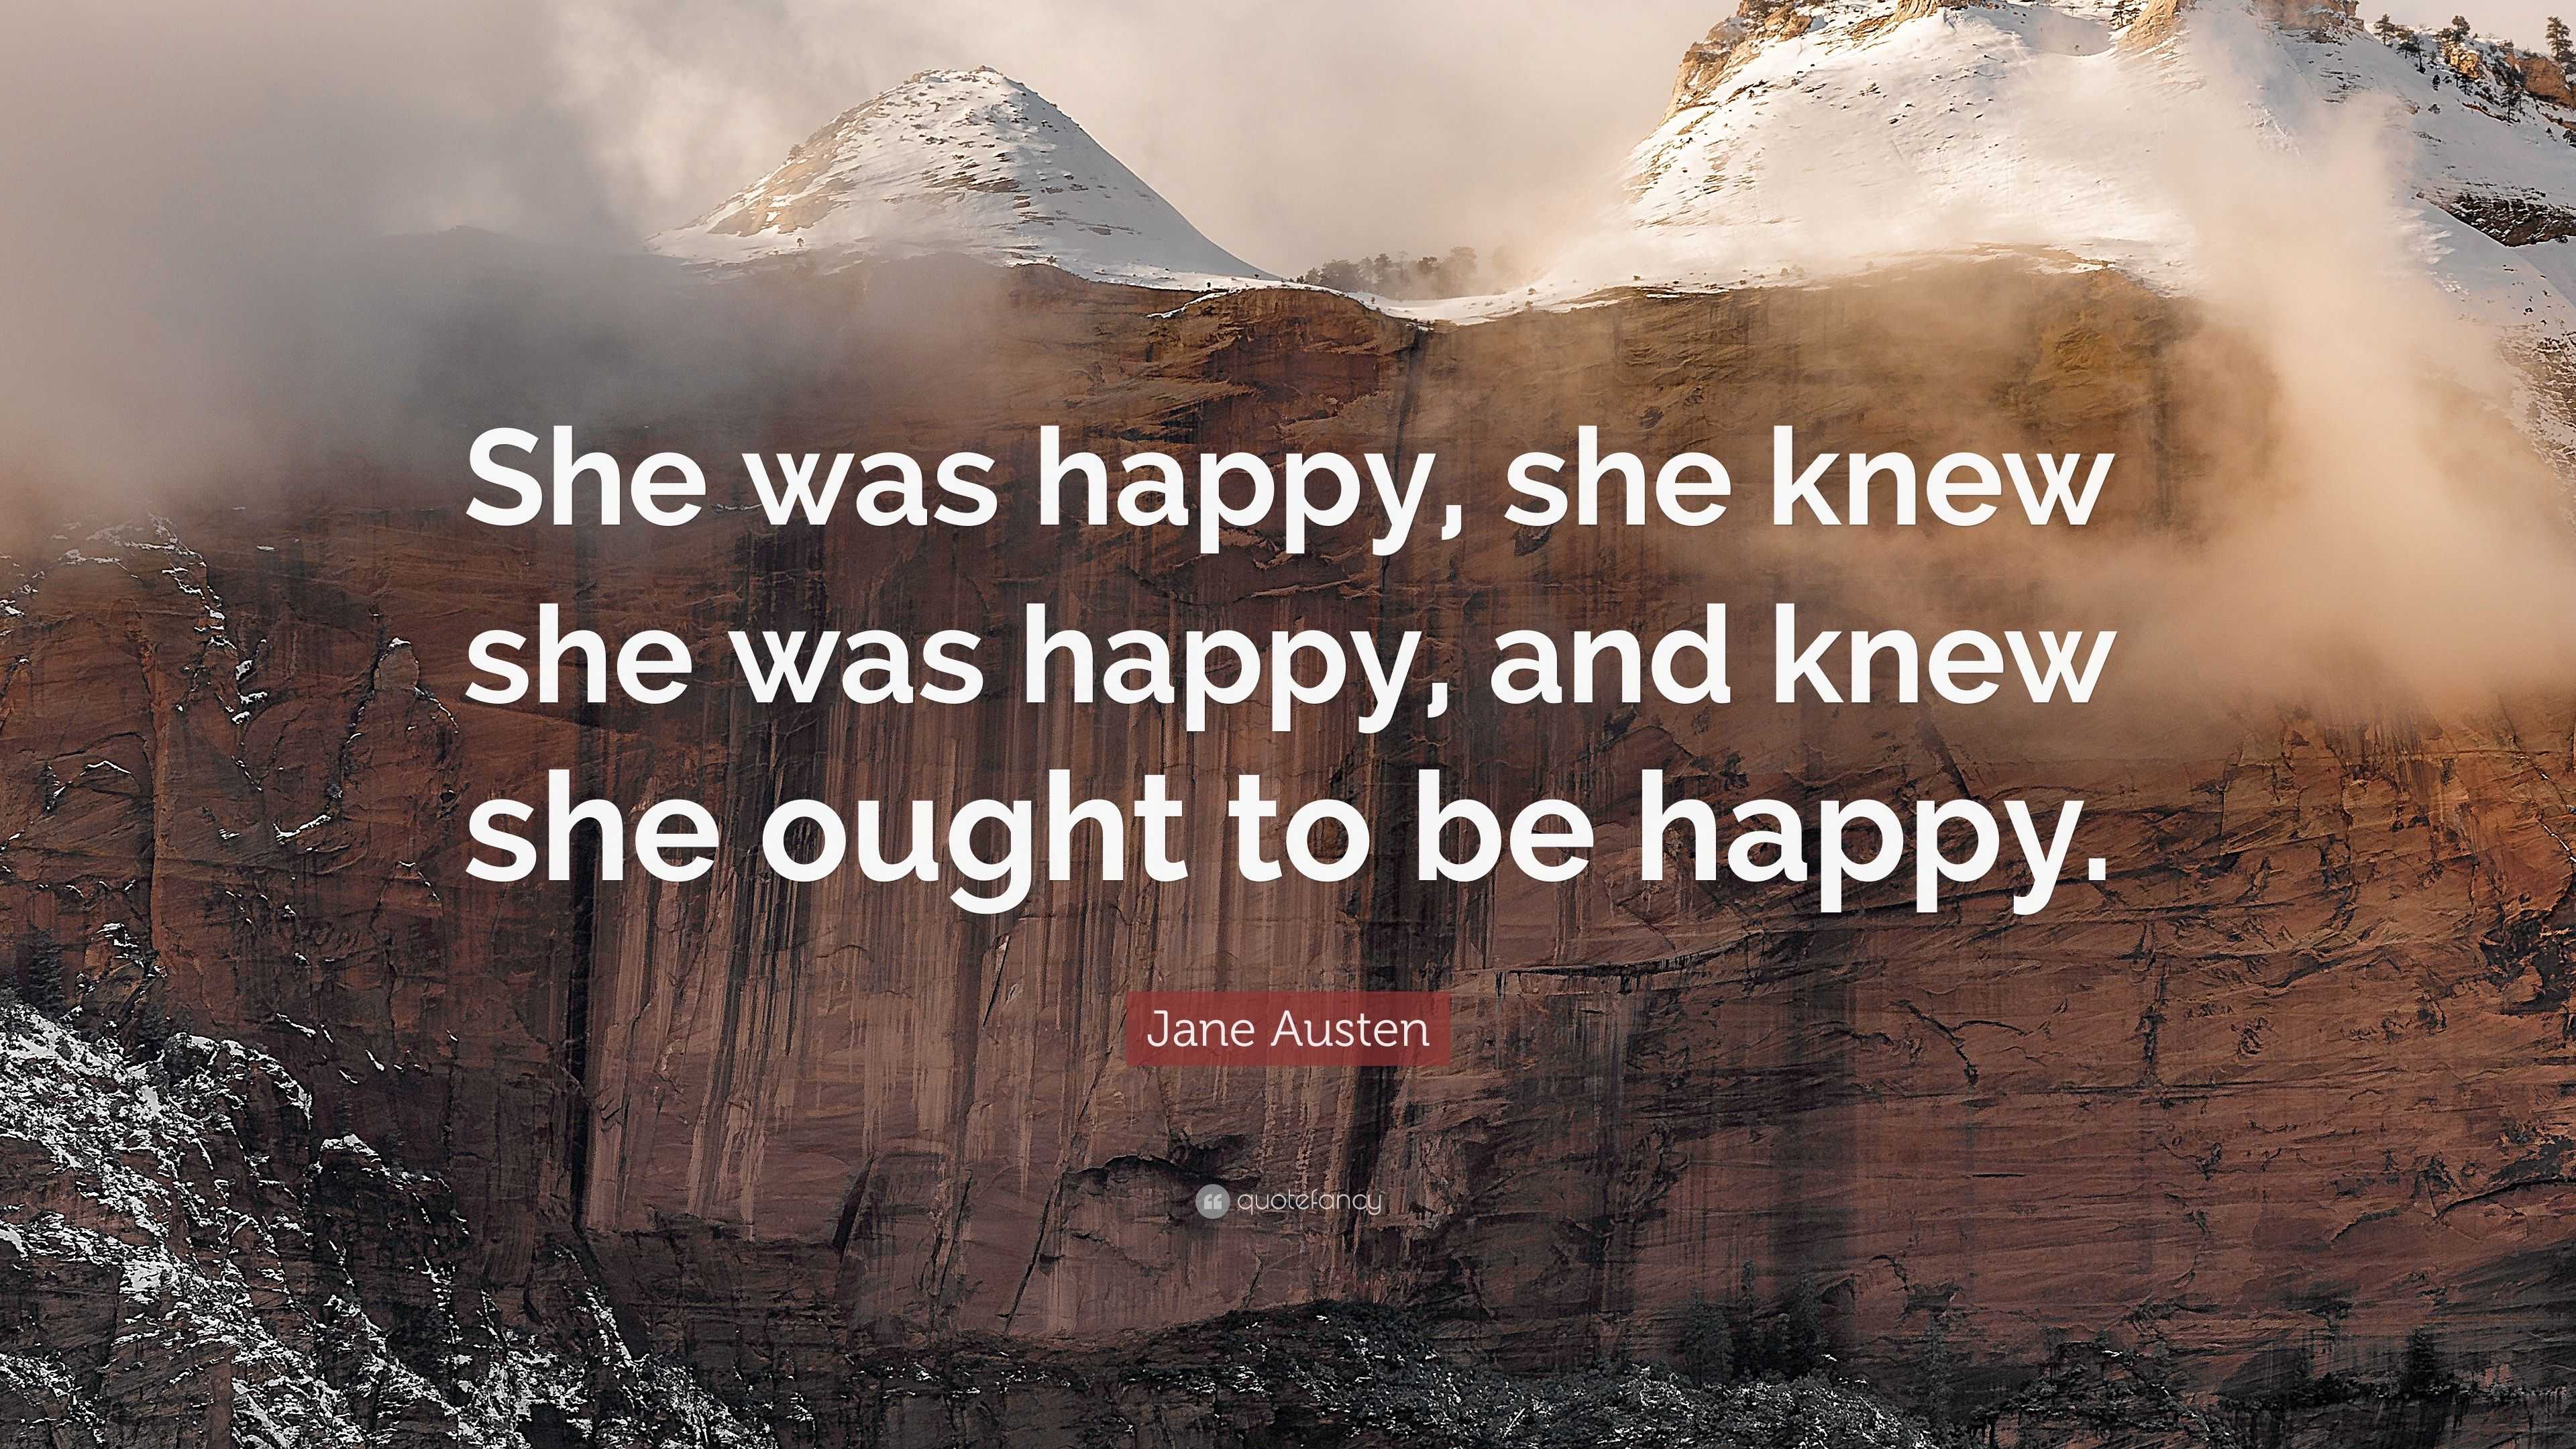 Jane Austen Quote: “She was happy, she knew she was happy, and knew she ...